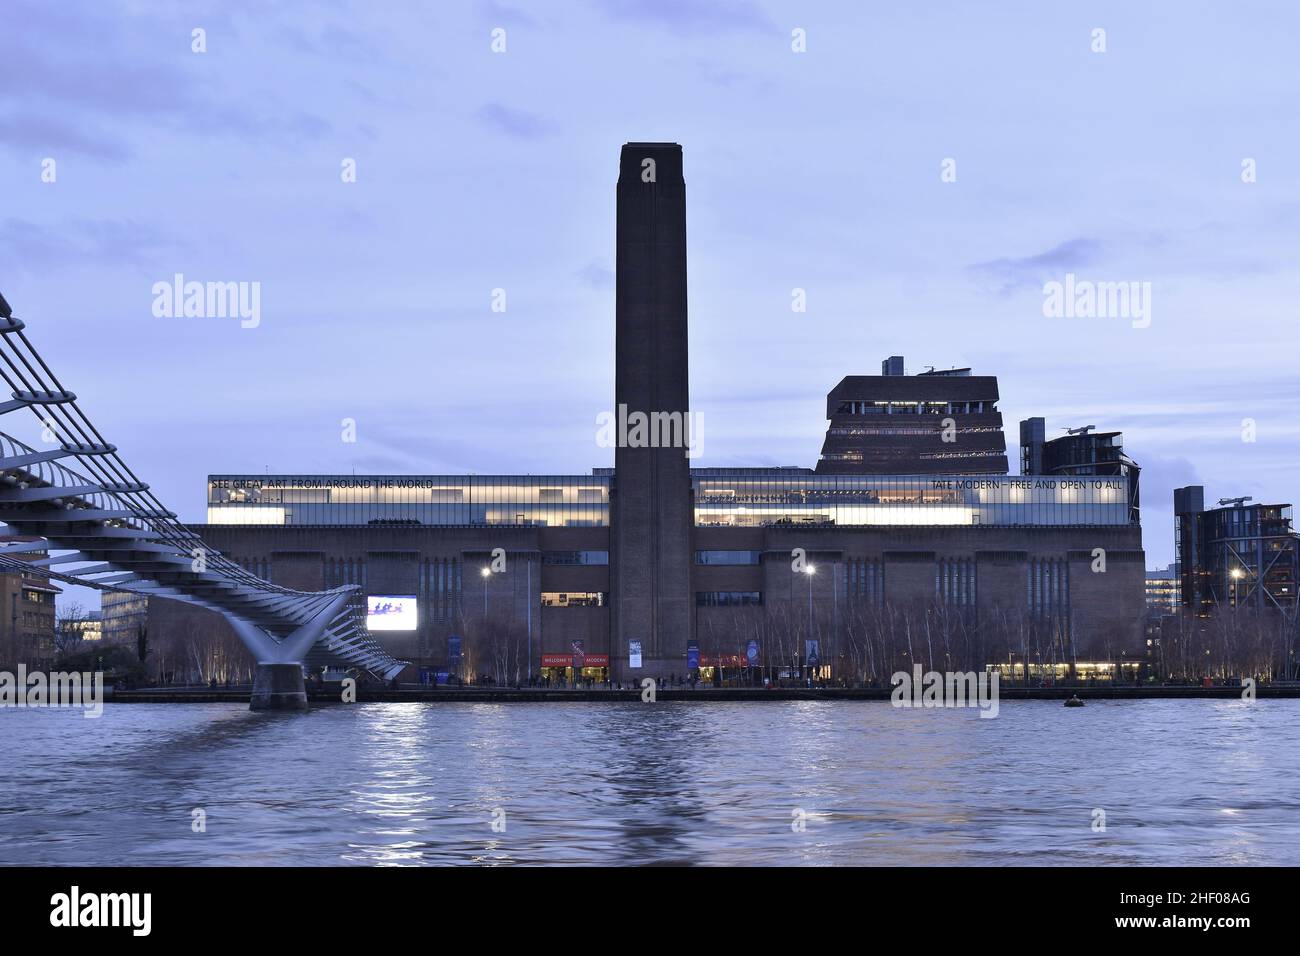 Tate Modern Art Galley building on the south bank of river Thames, dusk view from the north bank, London UK. Stock Photo